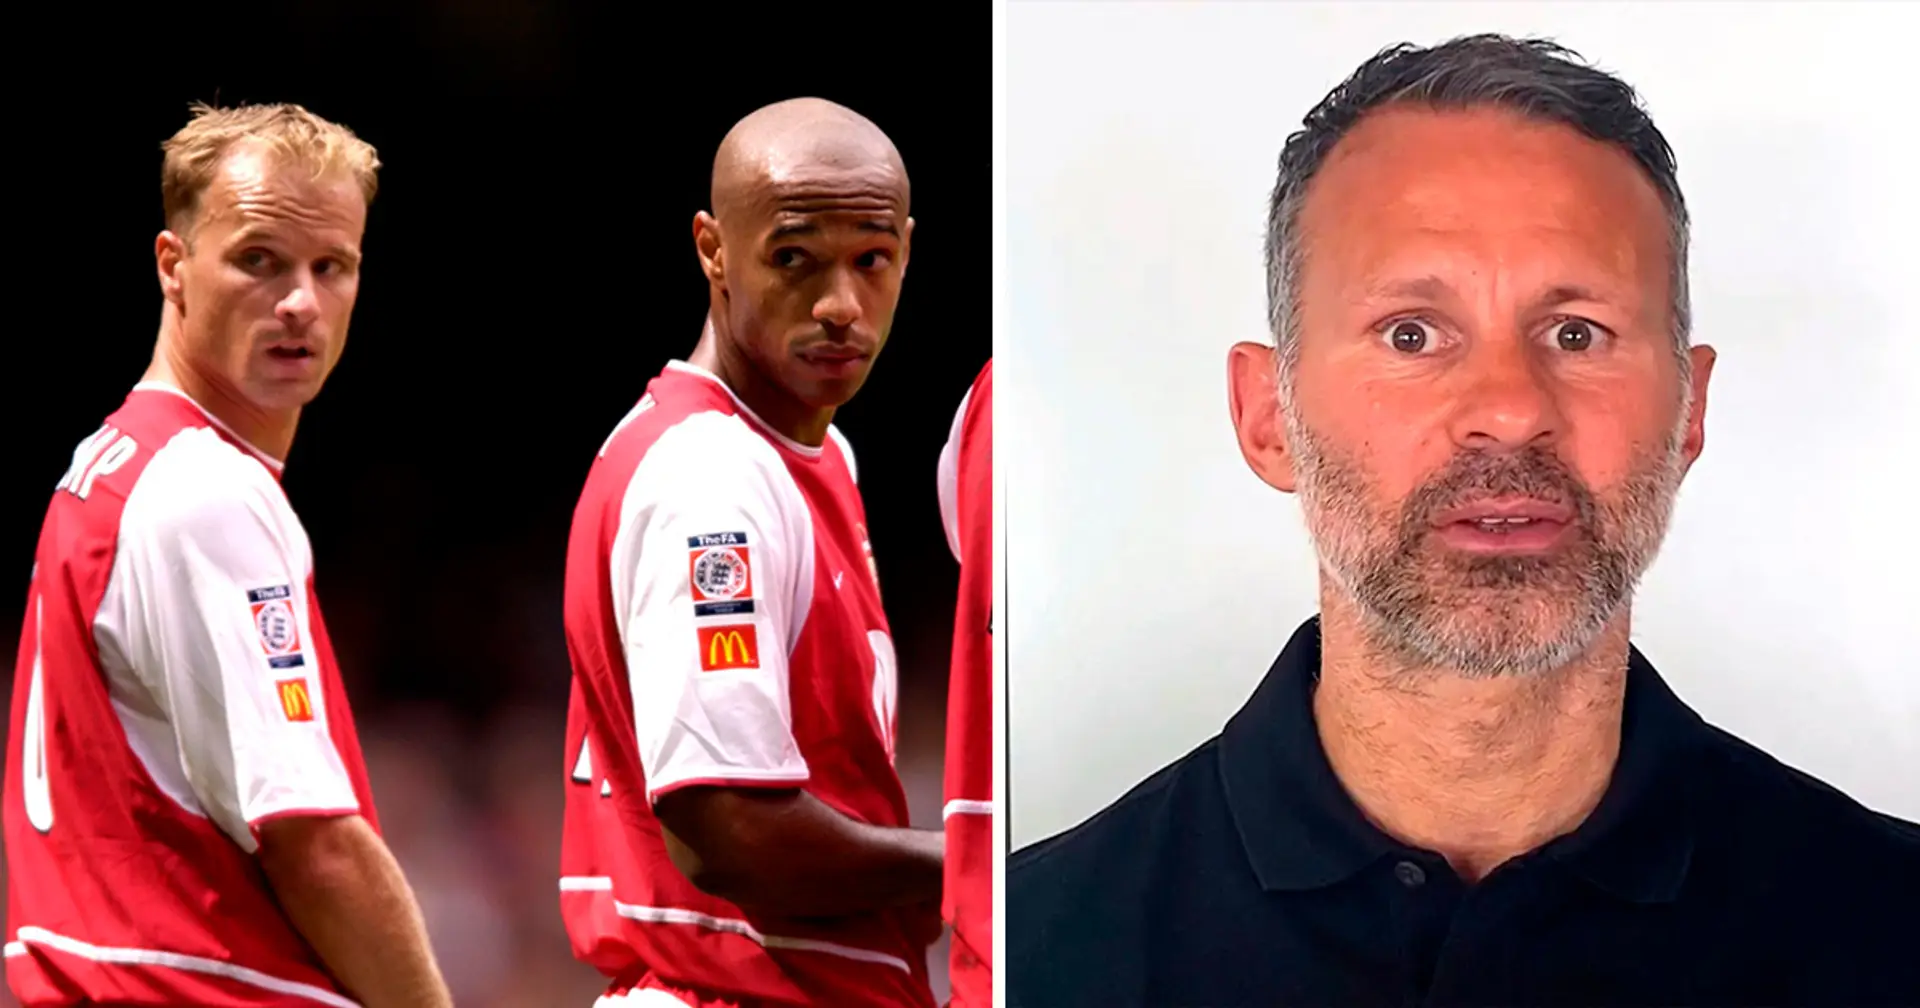 'I wouldn't even look at them': Ryan Giggs named 4 Arsenal players he never liked